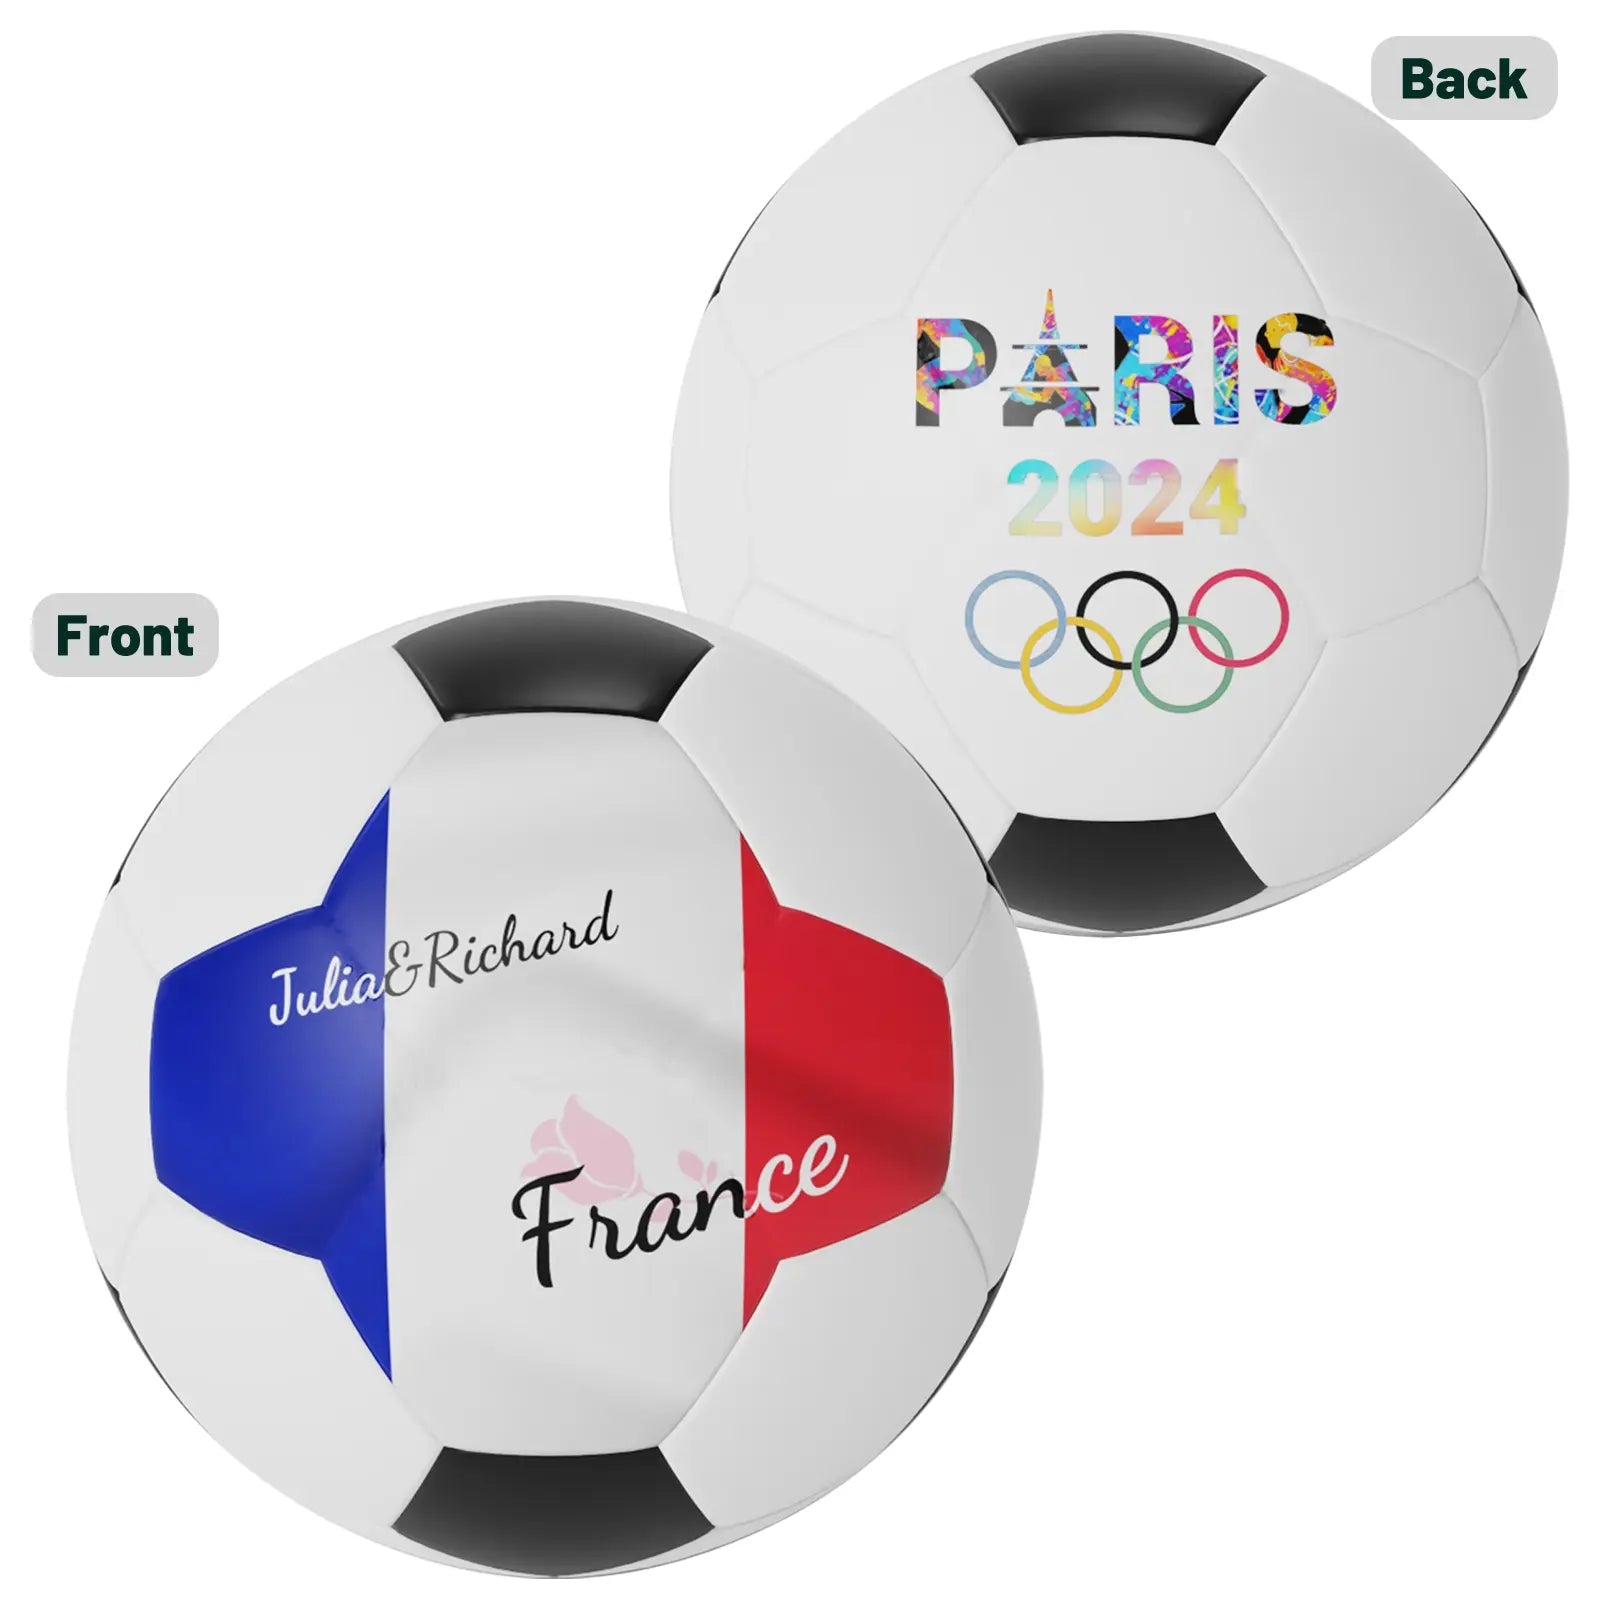 Personalized Custom 2024 Paris Olympics Themed Gift Soccer Ball - Family Watchs